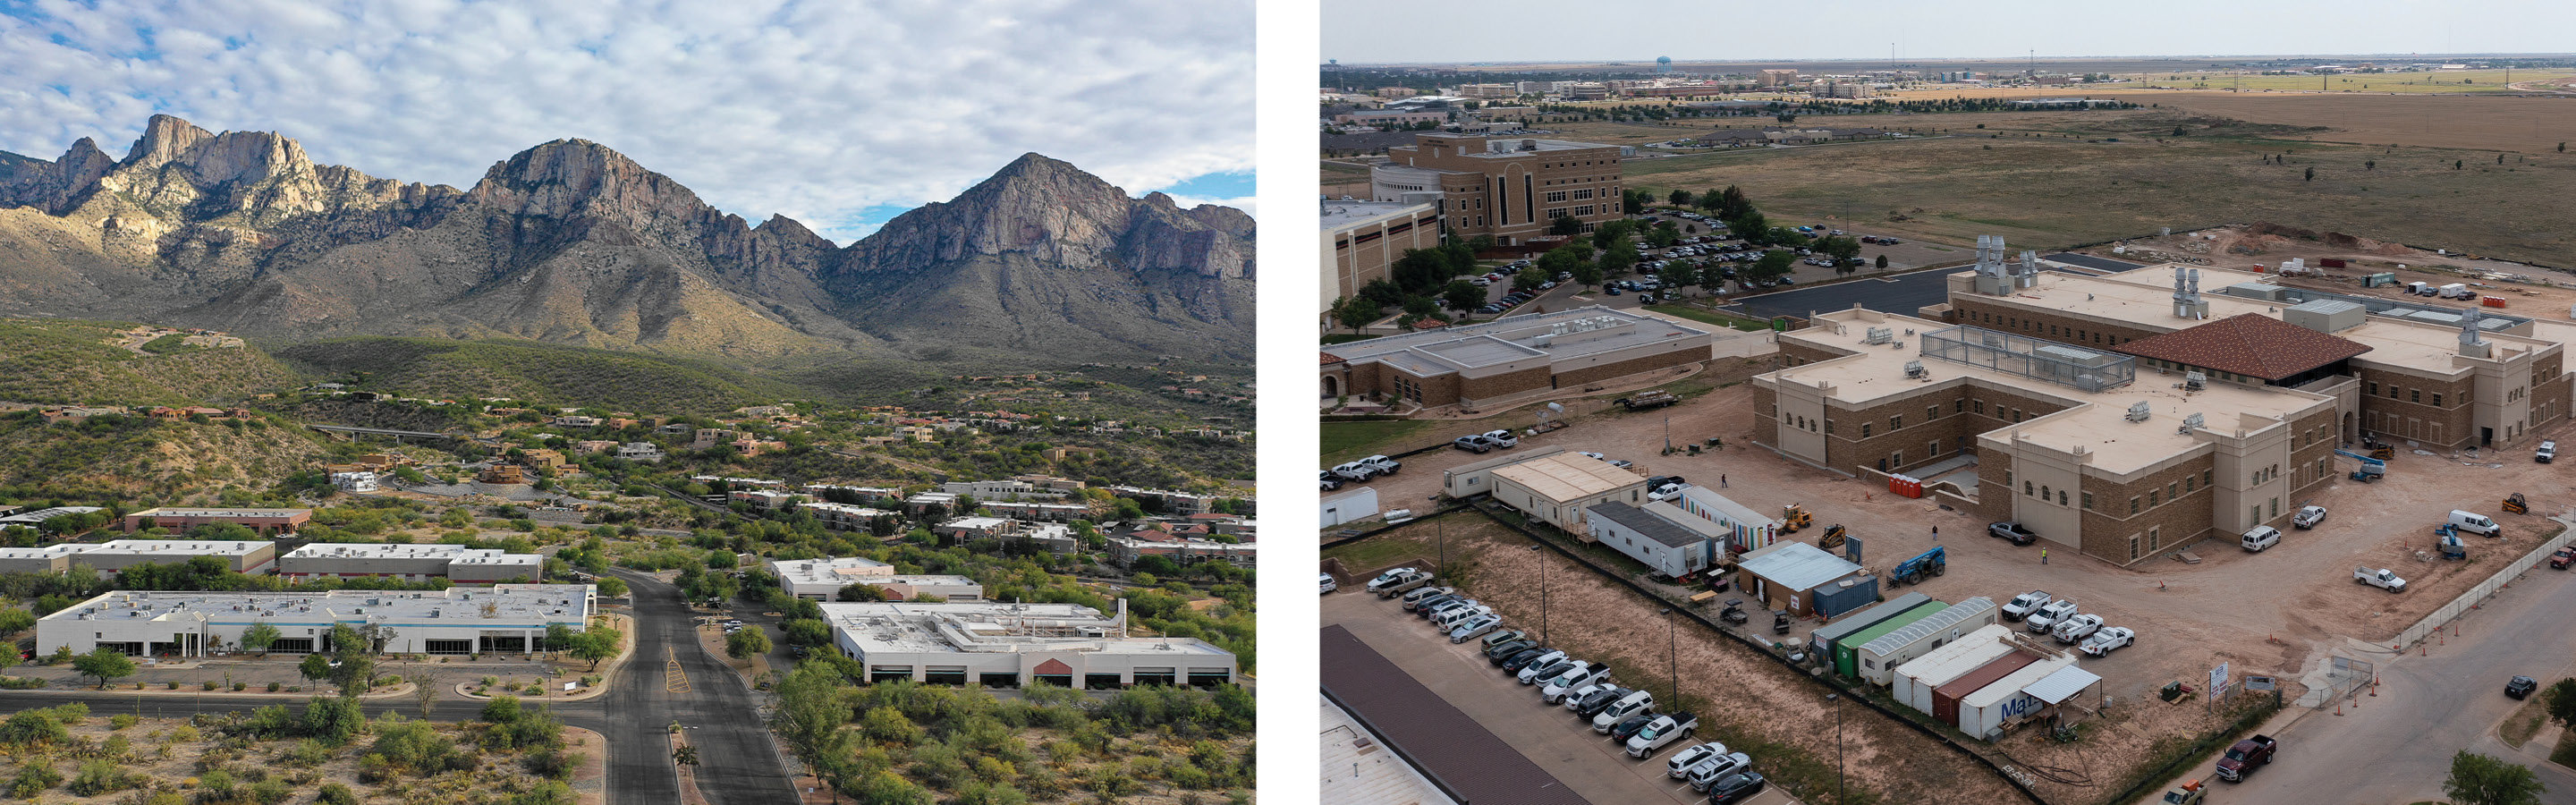 Oro Valley and Amarillo campuses